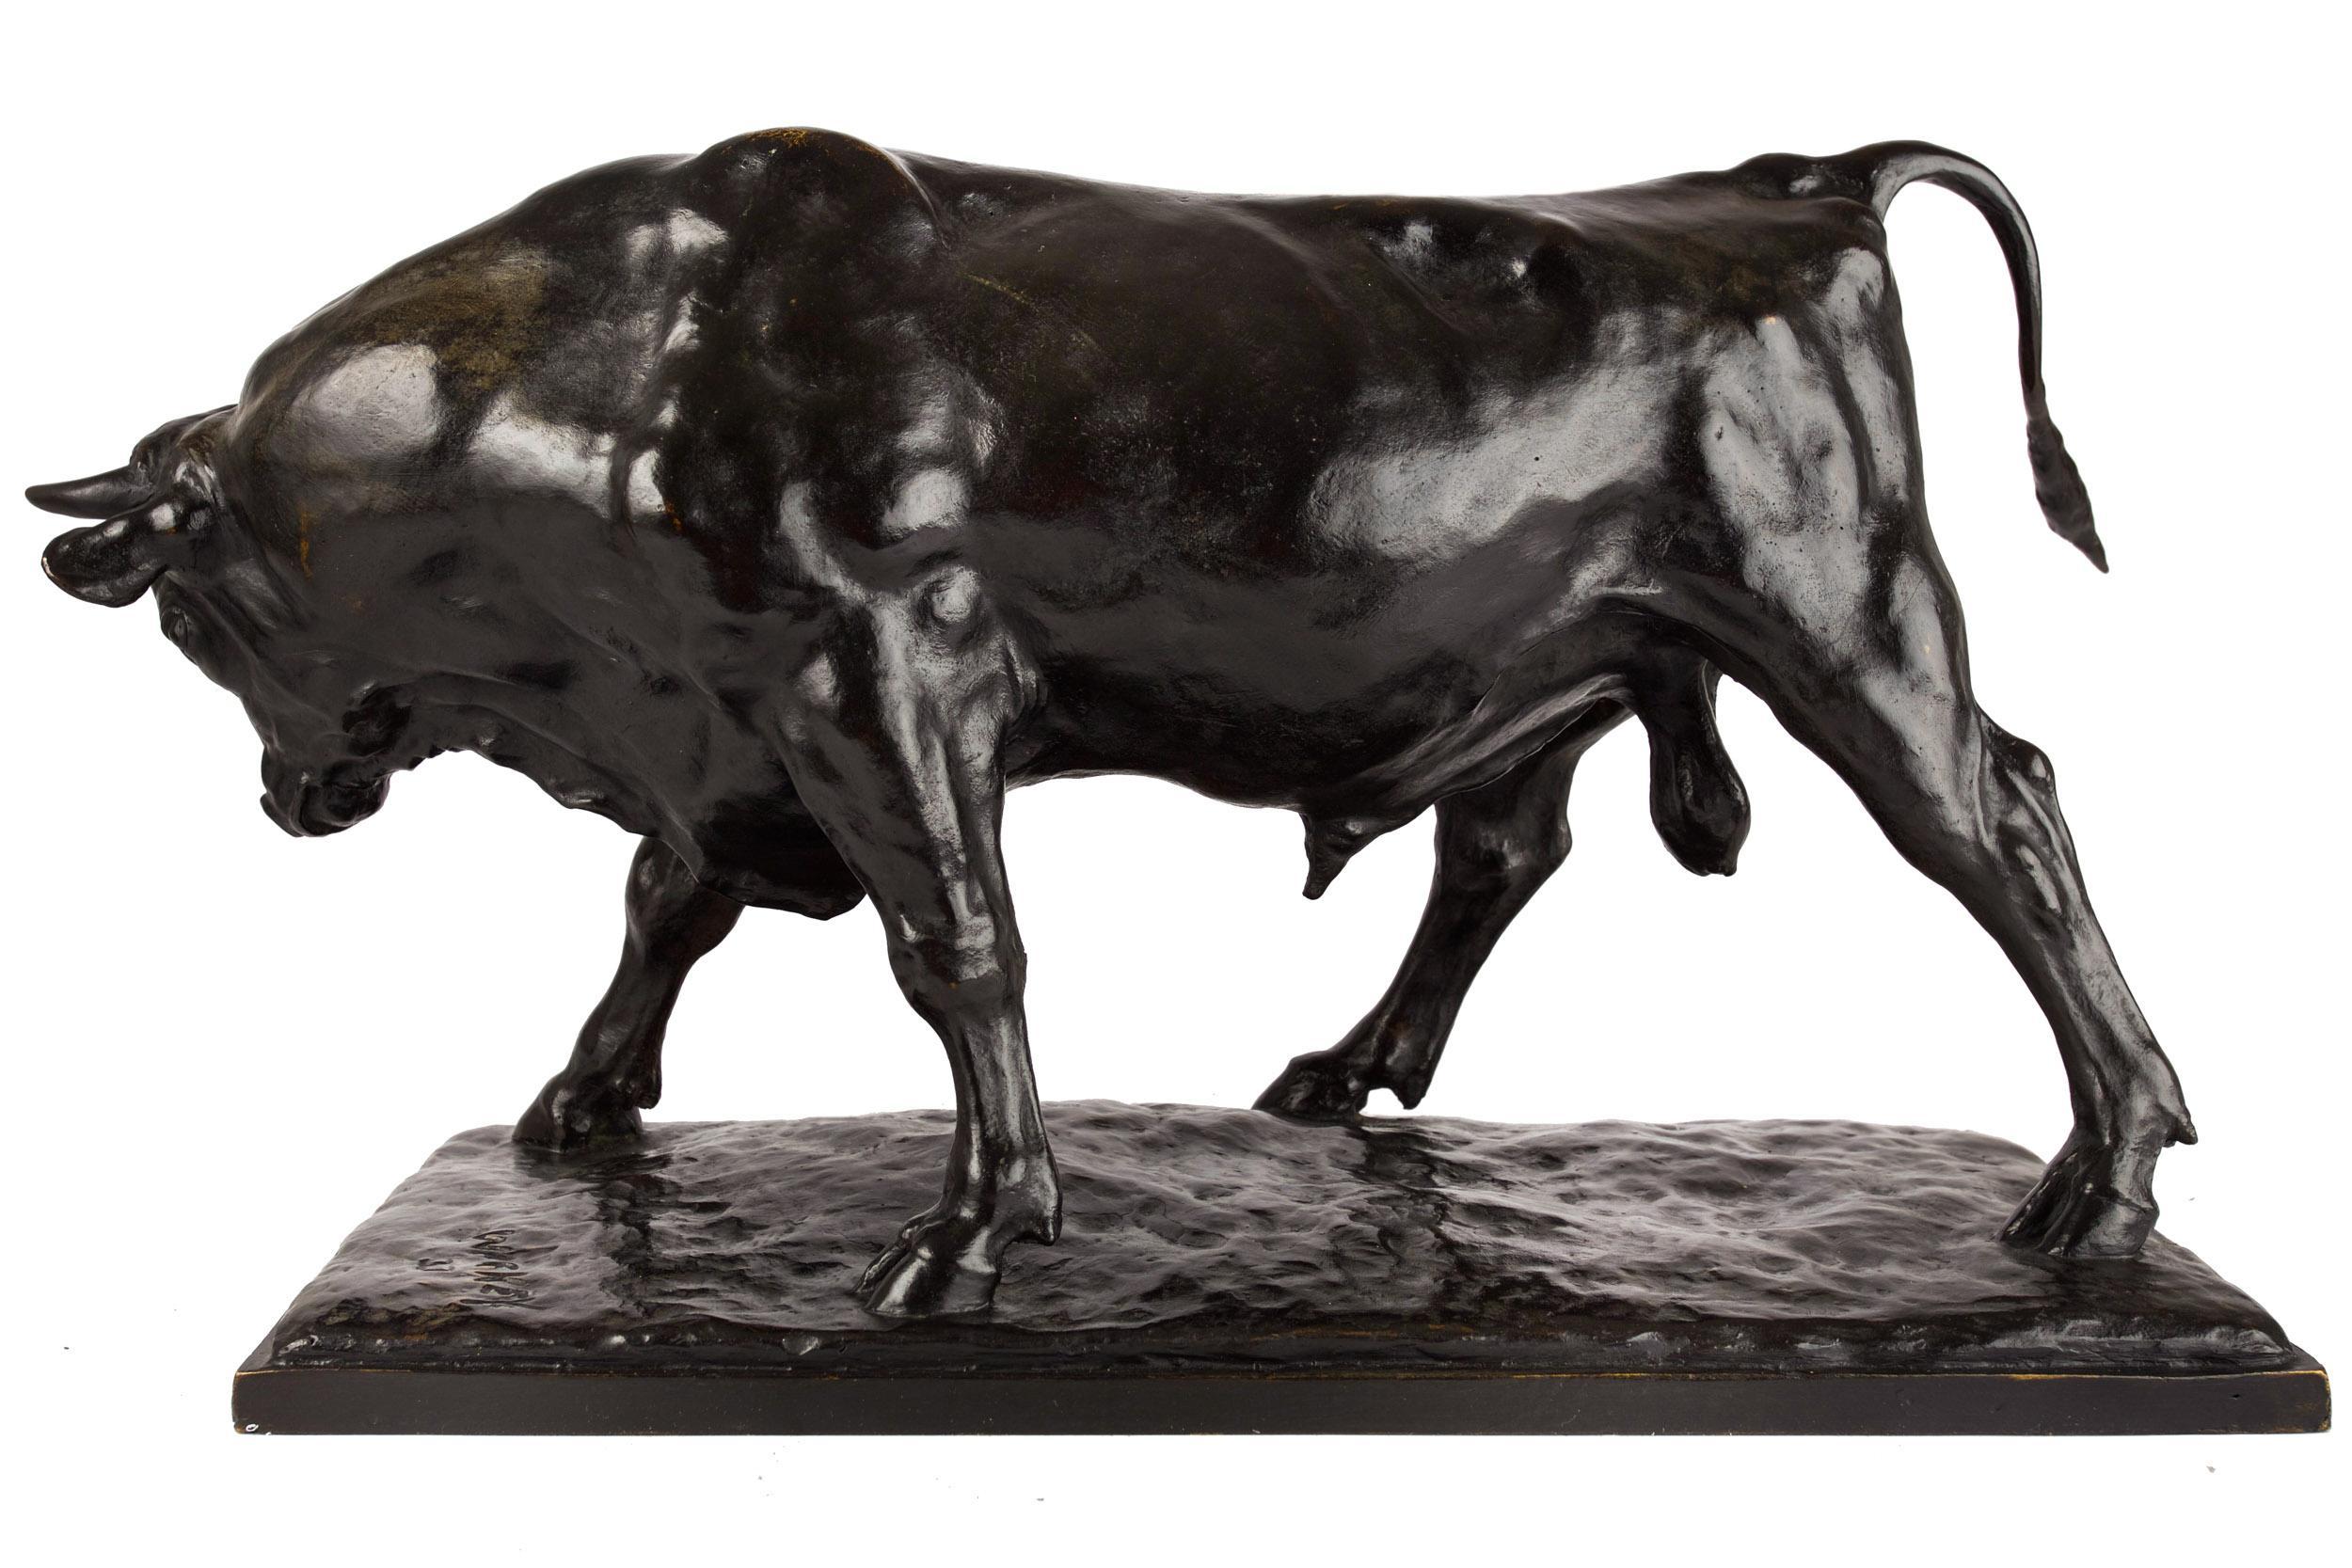 A very fine cast of Sulking Bull executed in 1937 by the Roman Bronze Works foundry in New York for Harry Wickey, it is an exceedingly rare model to show up on the open market. In 2001 the same model was offered at Christies situated over a small